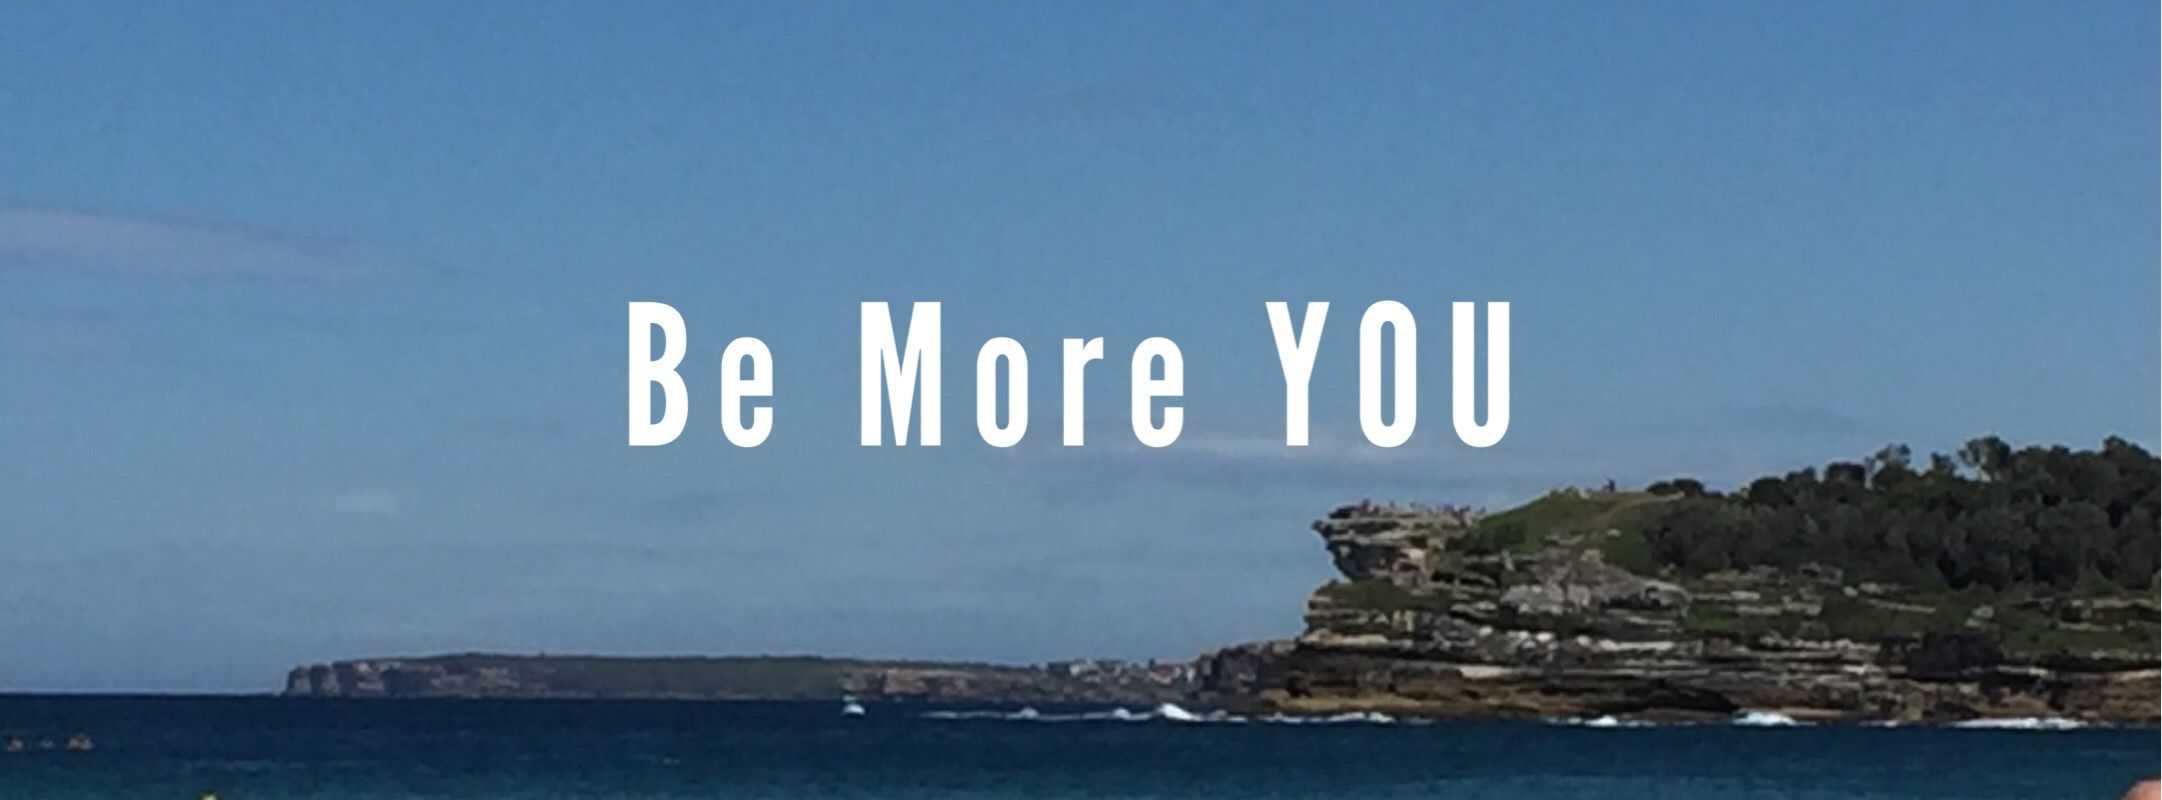 Be More YOU